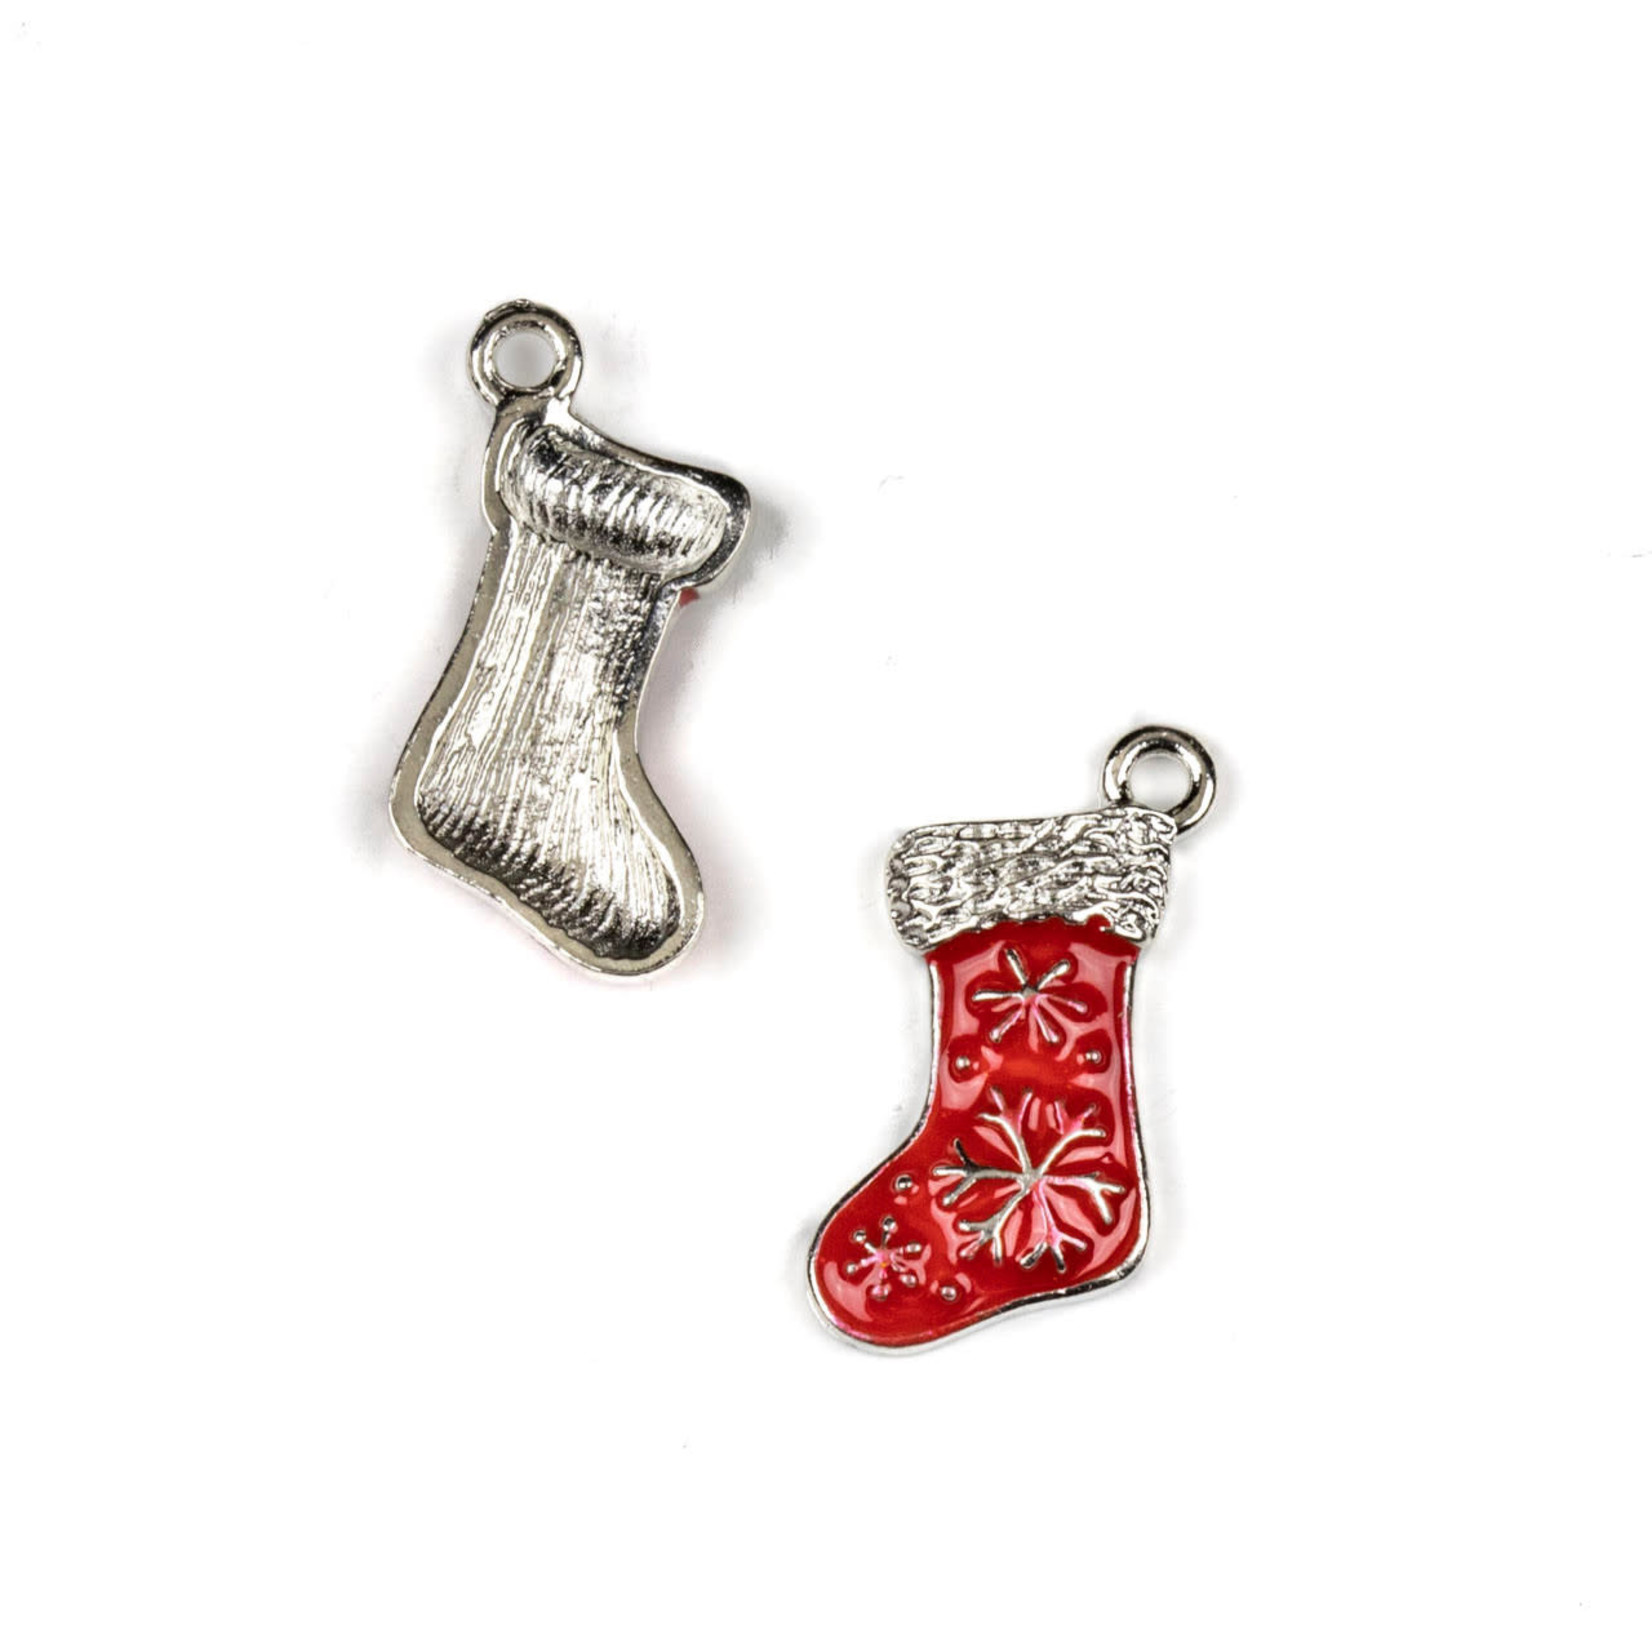 Christmas Stocking Charm - 11x21mm Enameled Red on Silver